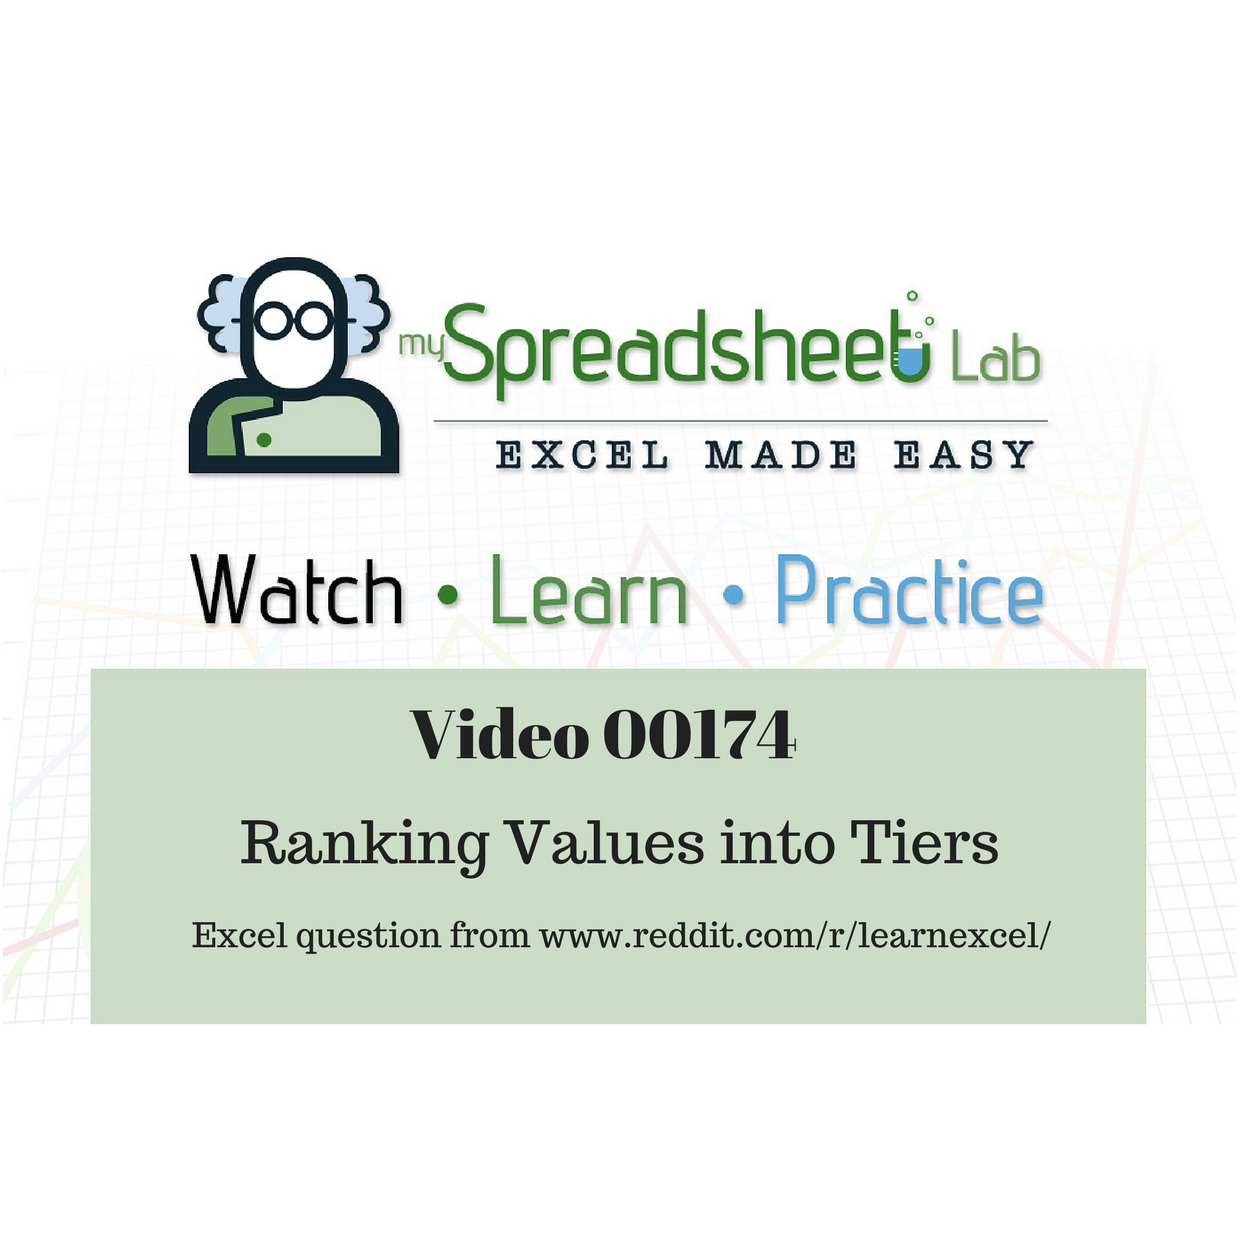 Video 00174 Ranking Values into Tiers in Excel